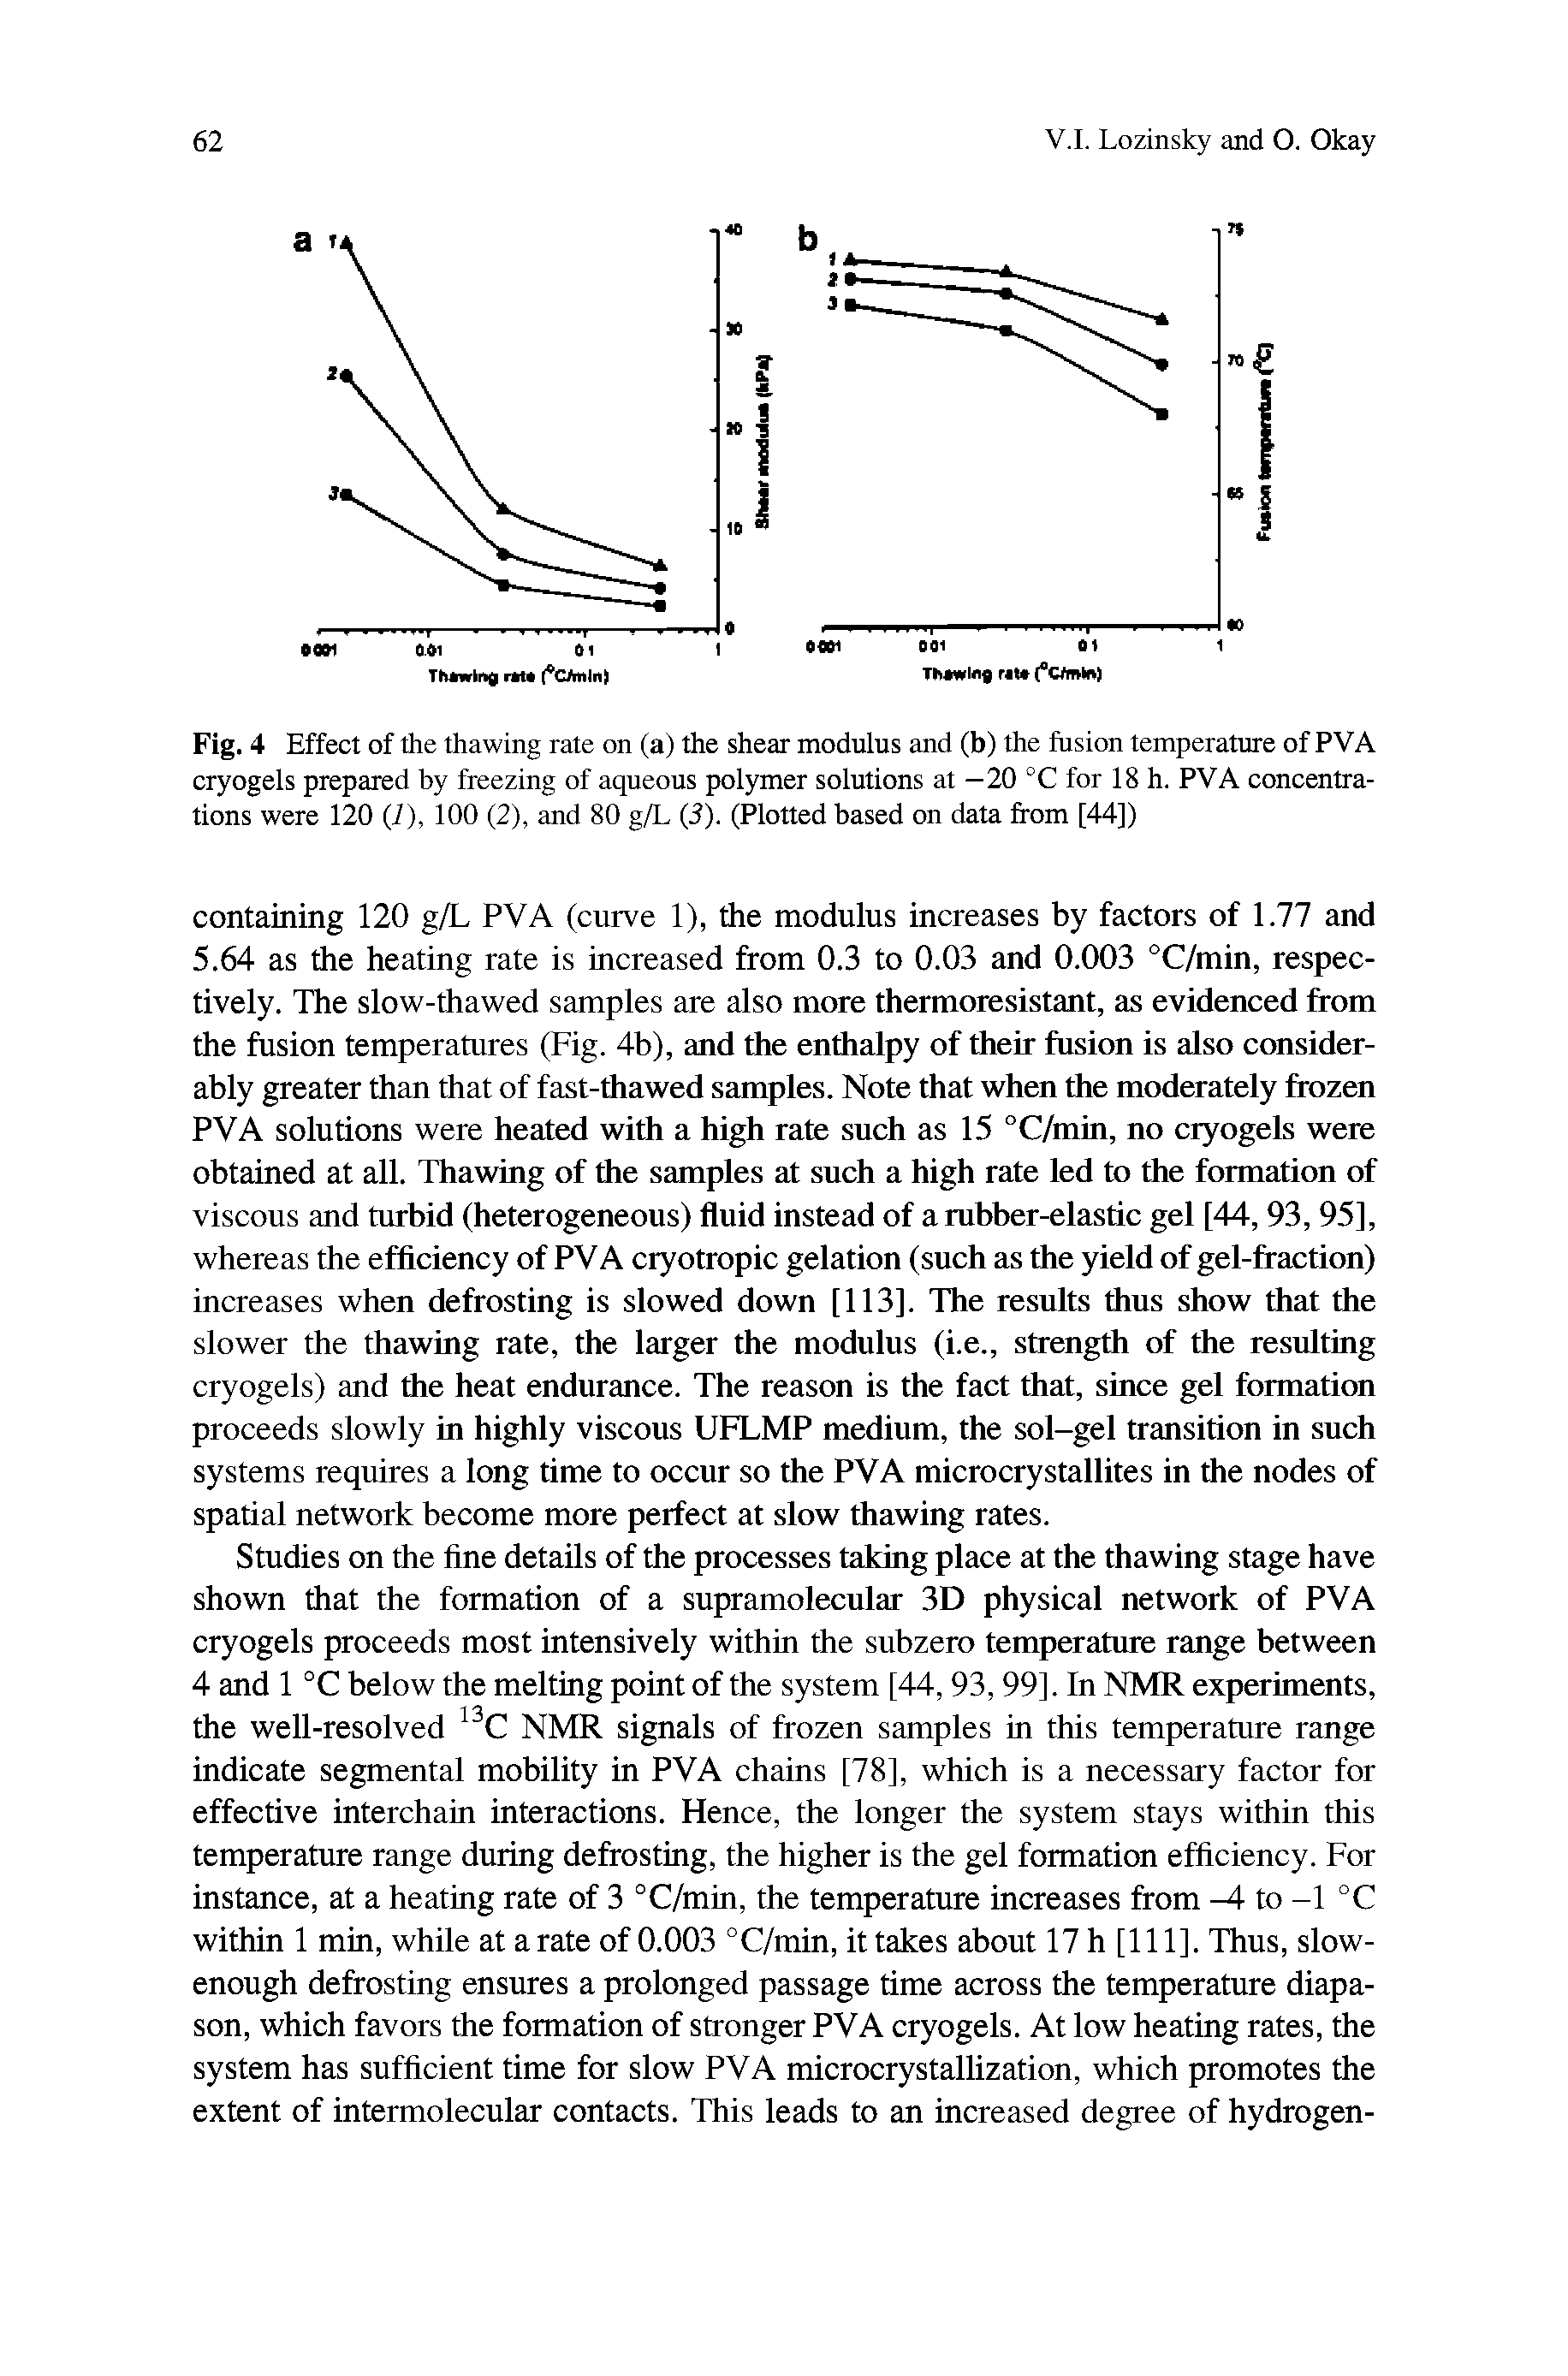 Fig. 4 Effect of the thawing rate on (a) the shear modulus and (b) the fusion temperature of PVA cryogels prepared by freezing of aqueous polymer solutions at —20 °C for 18 h. PVA concentrations were 120 (i), 100 (2), and 80 g/L (3). (Plotted based on data from [44])...